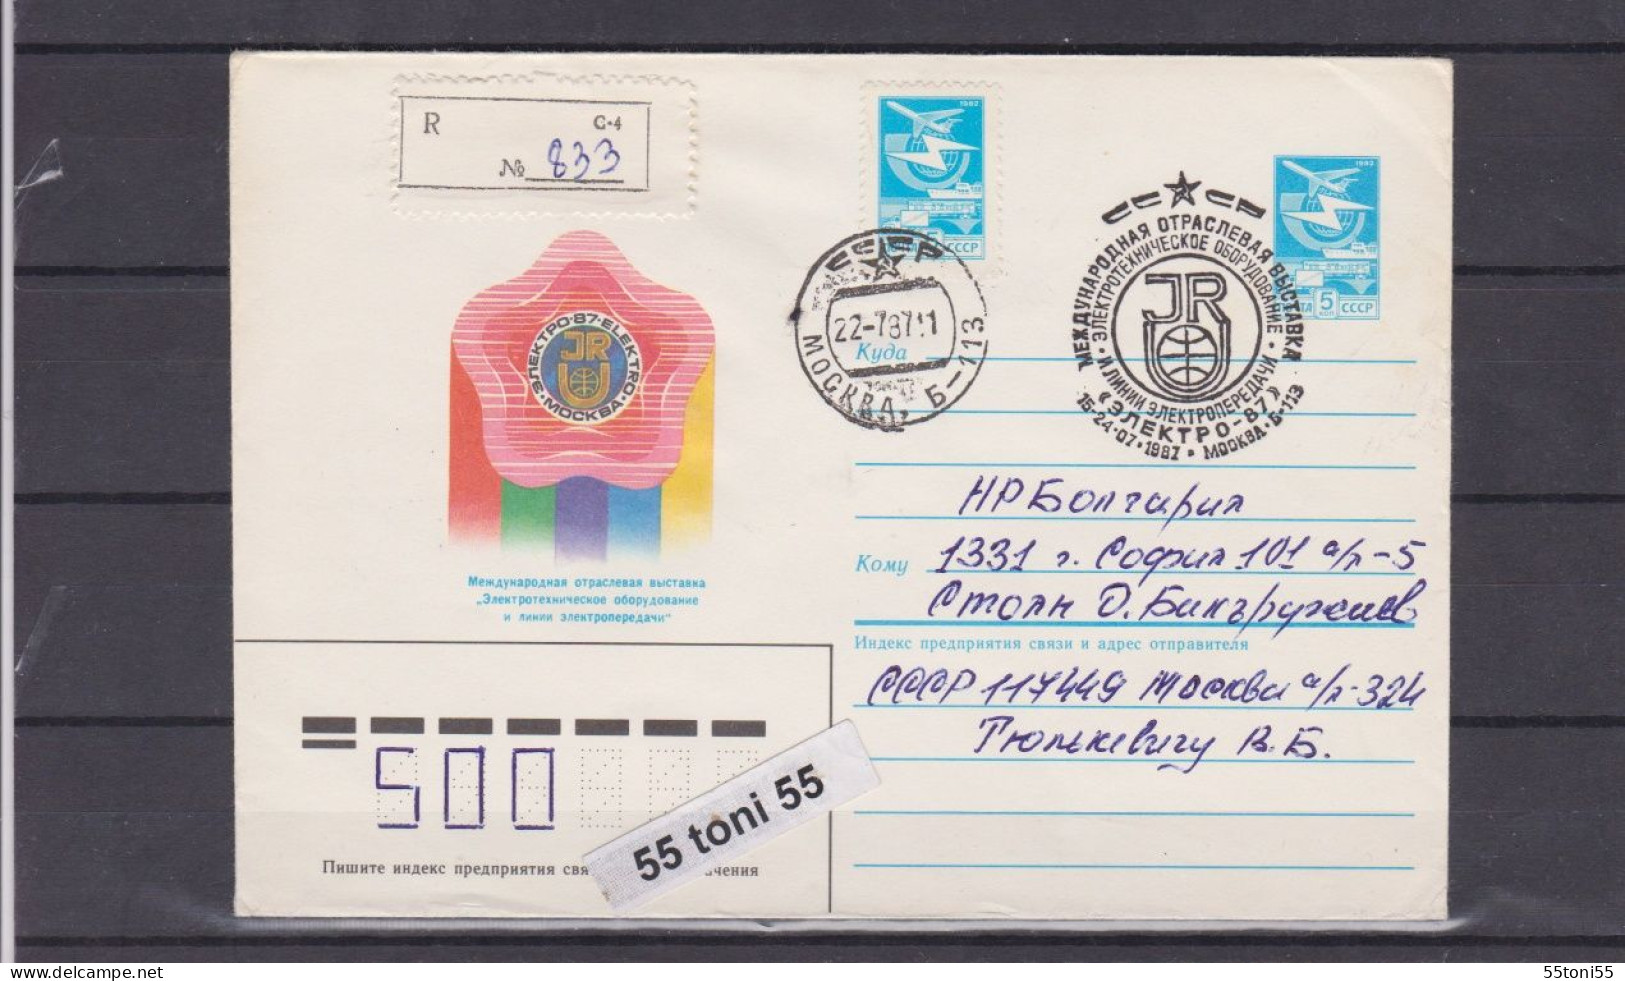 1987  Electro-87 Inter. Exhibition Of Electrotechnical Equipment  P.Stationery + Special Cancel USSR P.Stationery Travel - Elektrizität